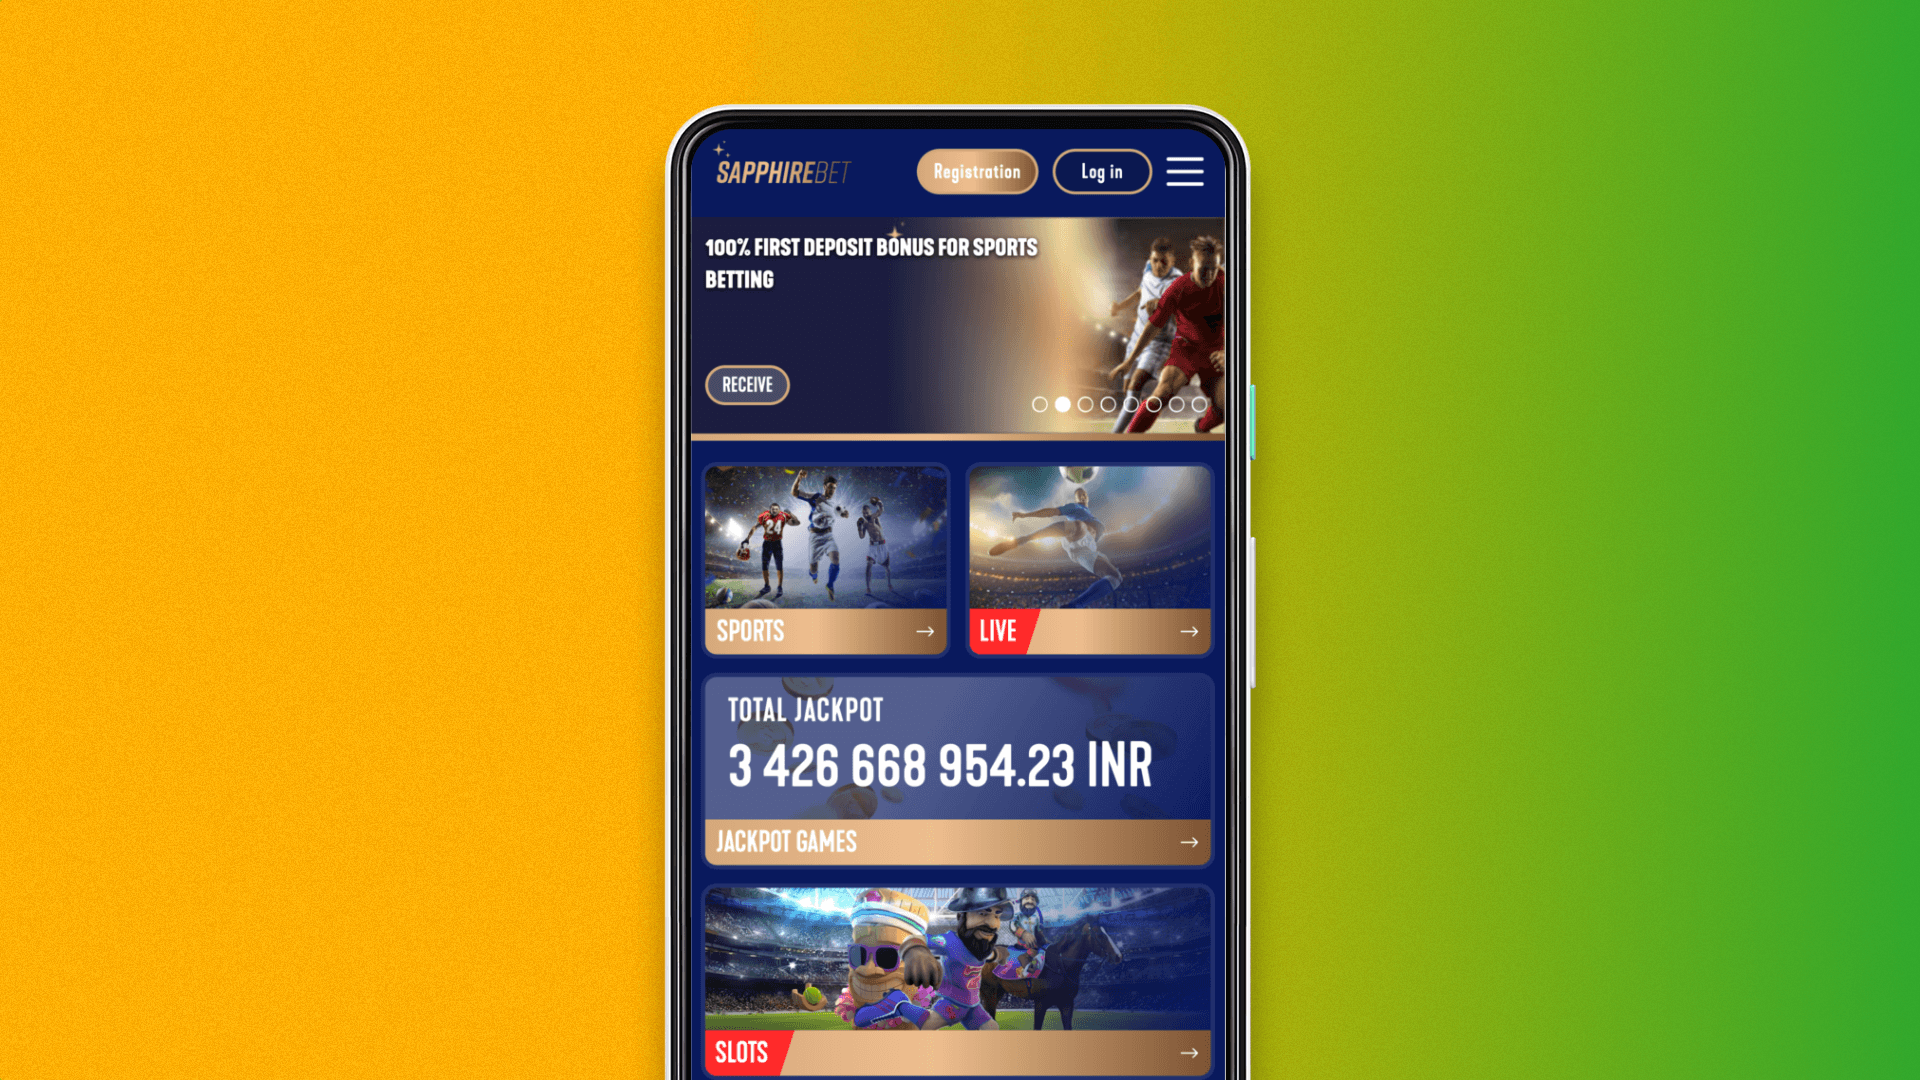 Visit the official website of SapphireBet to download the app for Android